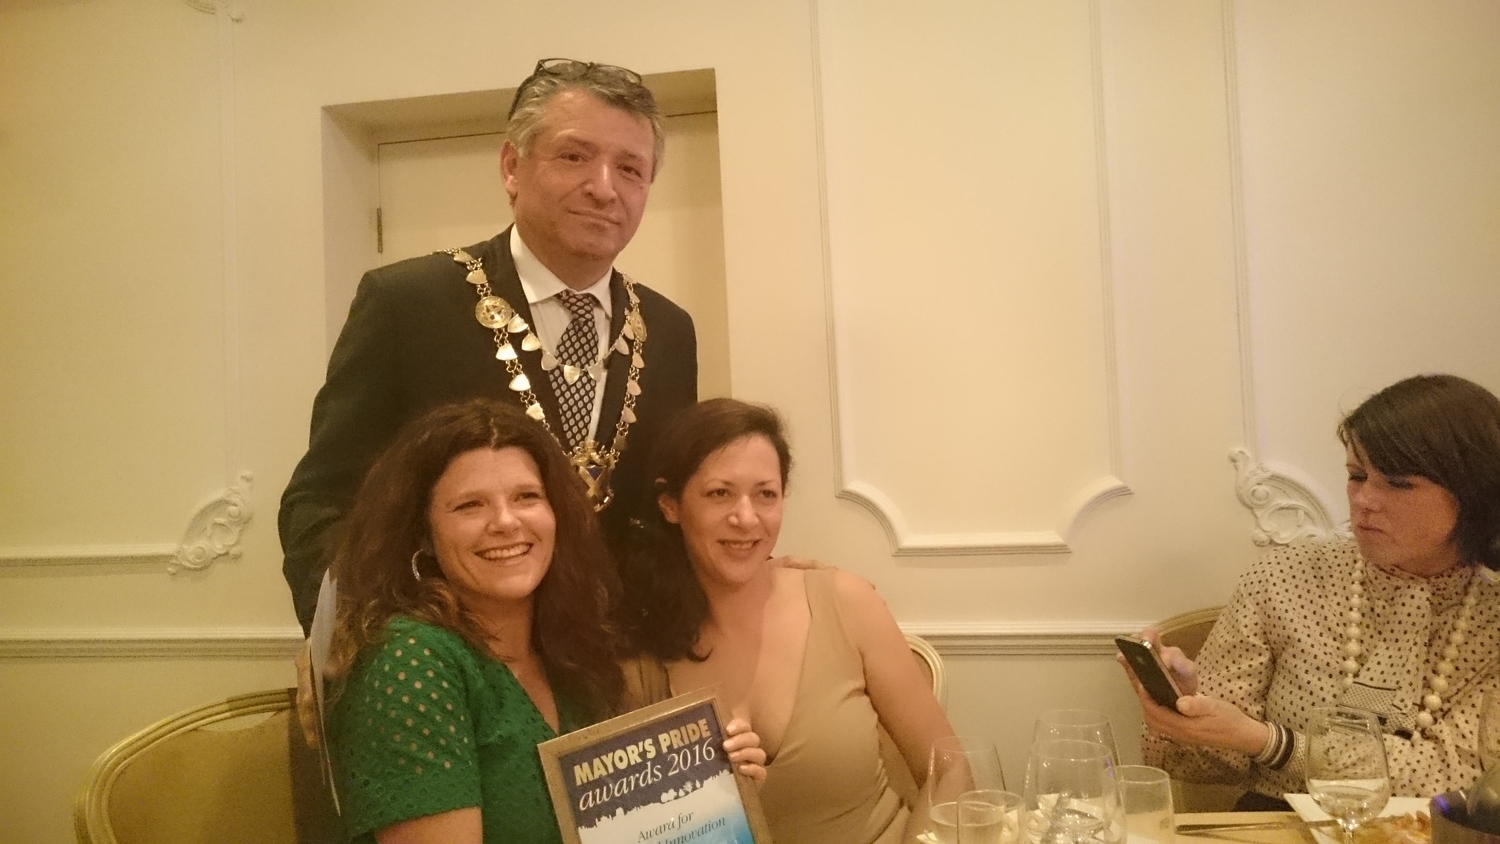 Catherine Fenton with colleagues at the Mayor's Pride Awards, March 2016